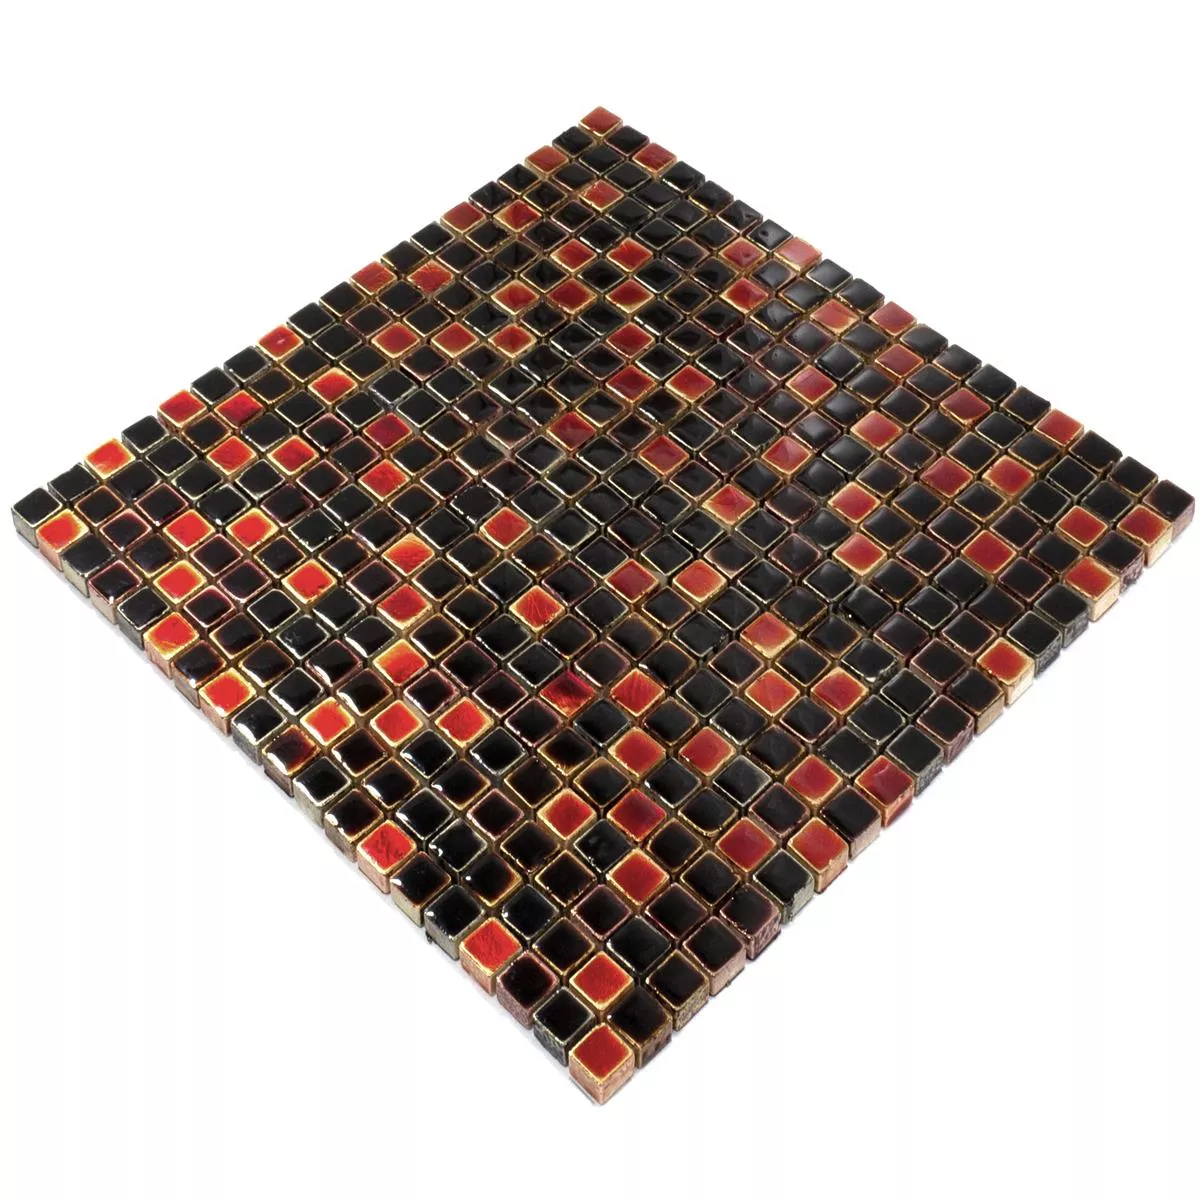 Natural Stone Mosaic Tiles Firestone Red Mix